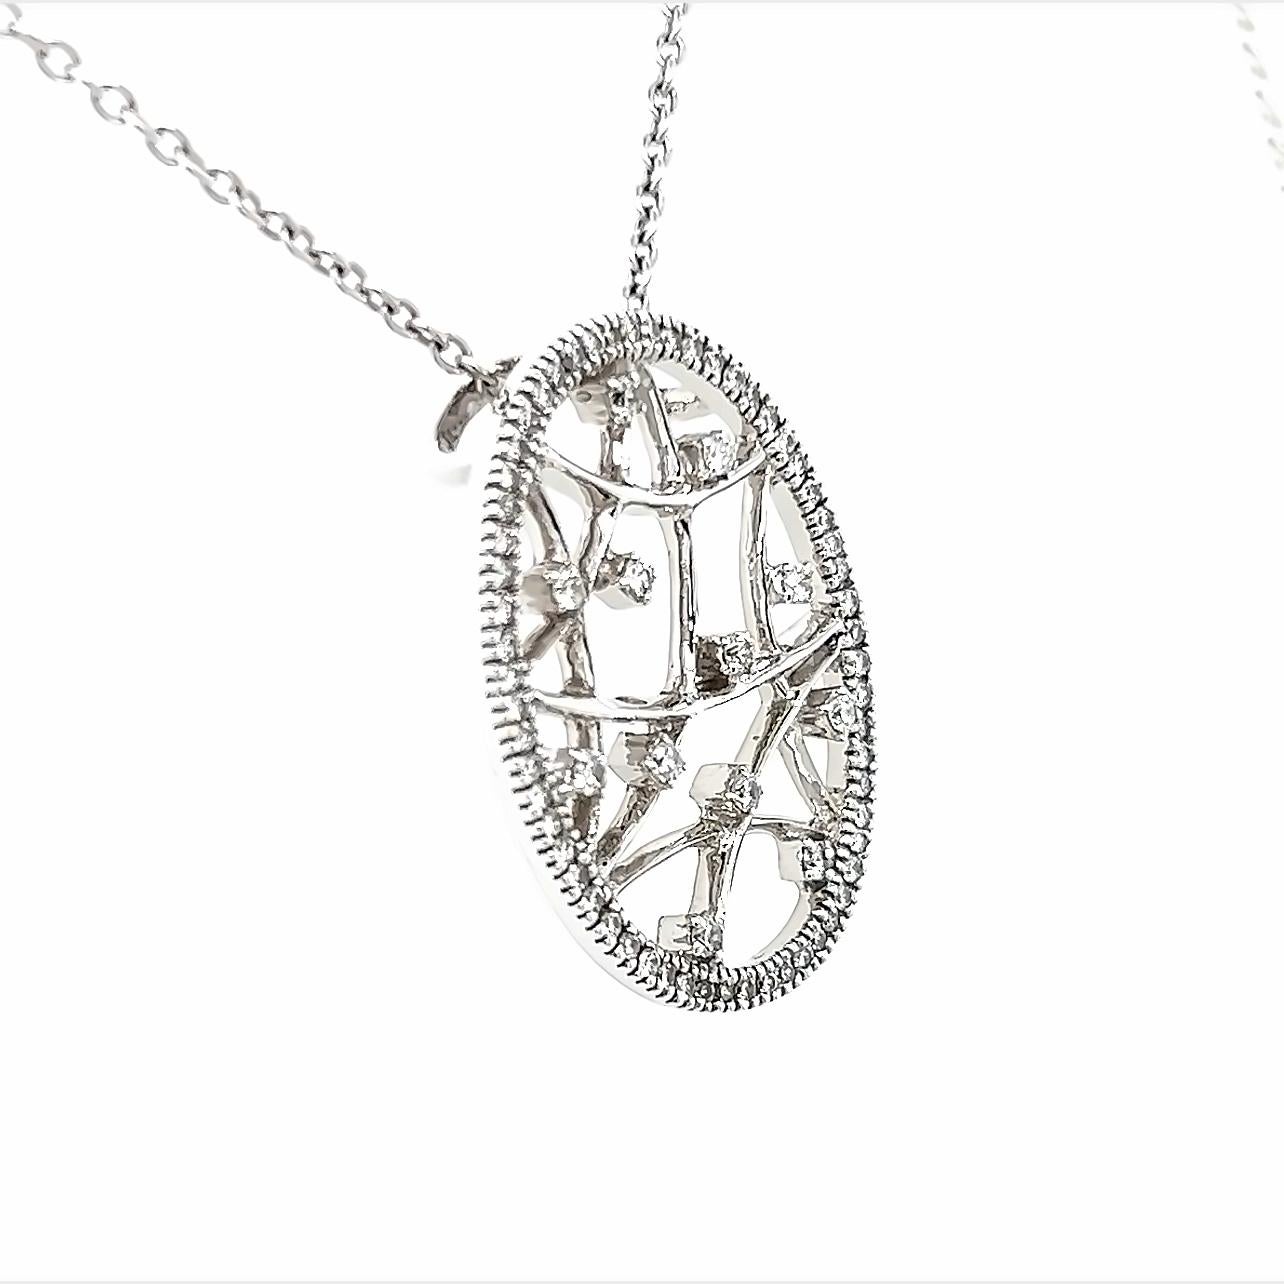 Dream Catcher Diamond Pendant

Details:

60- Round Diamonds- .38ct Total Weight- GH in Color- I1 in Clarity
14kt White Gold
